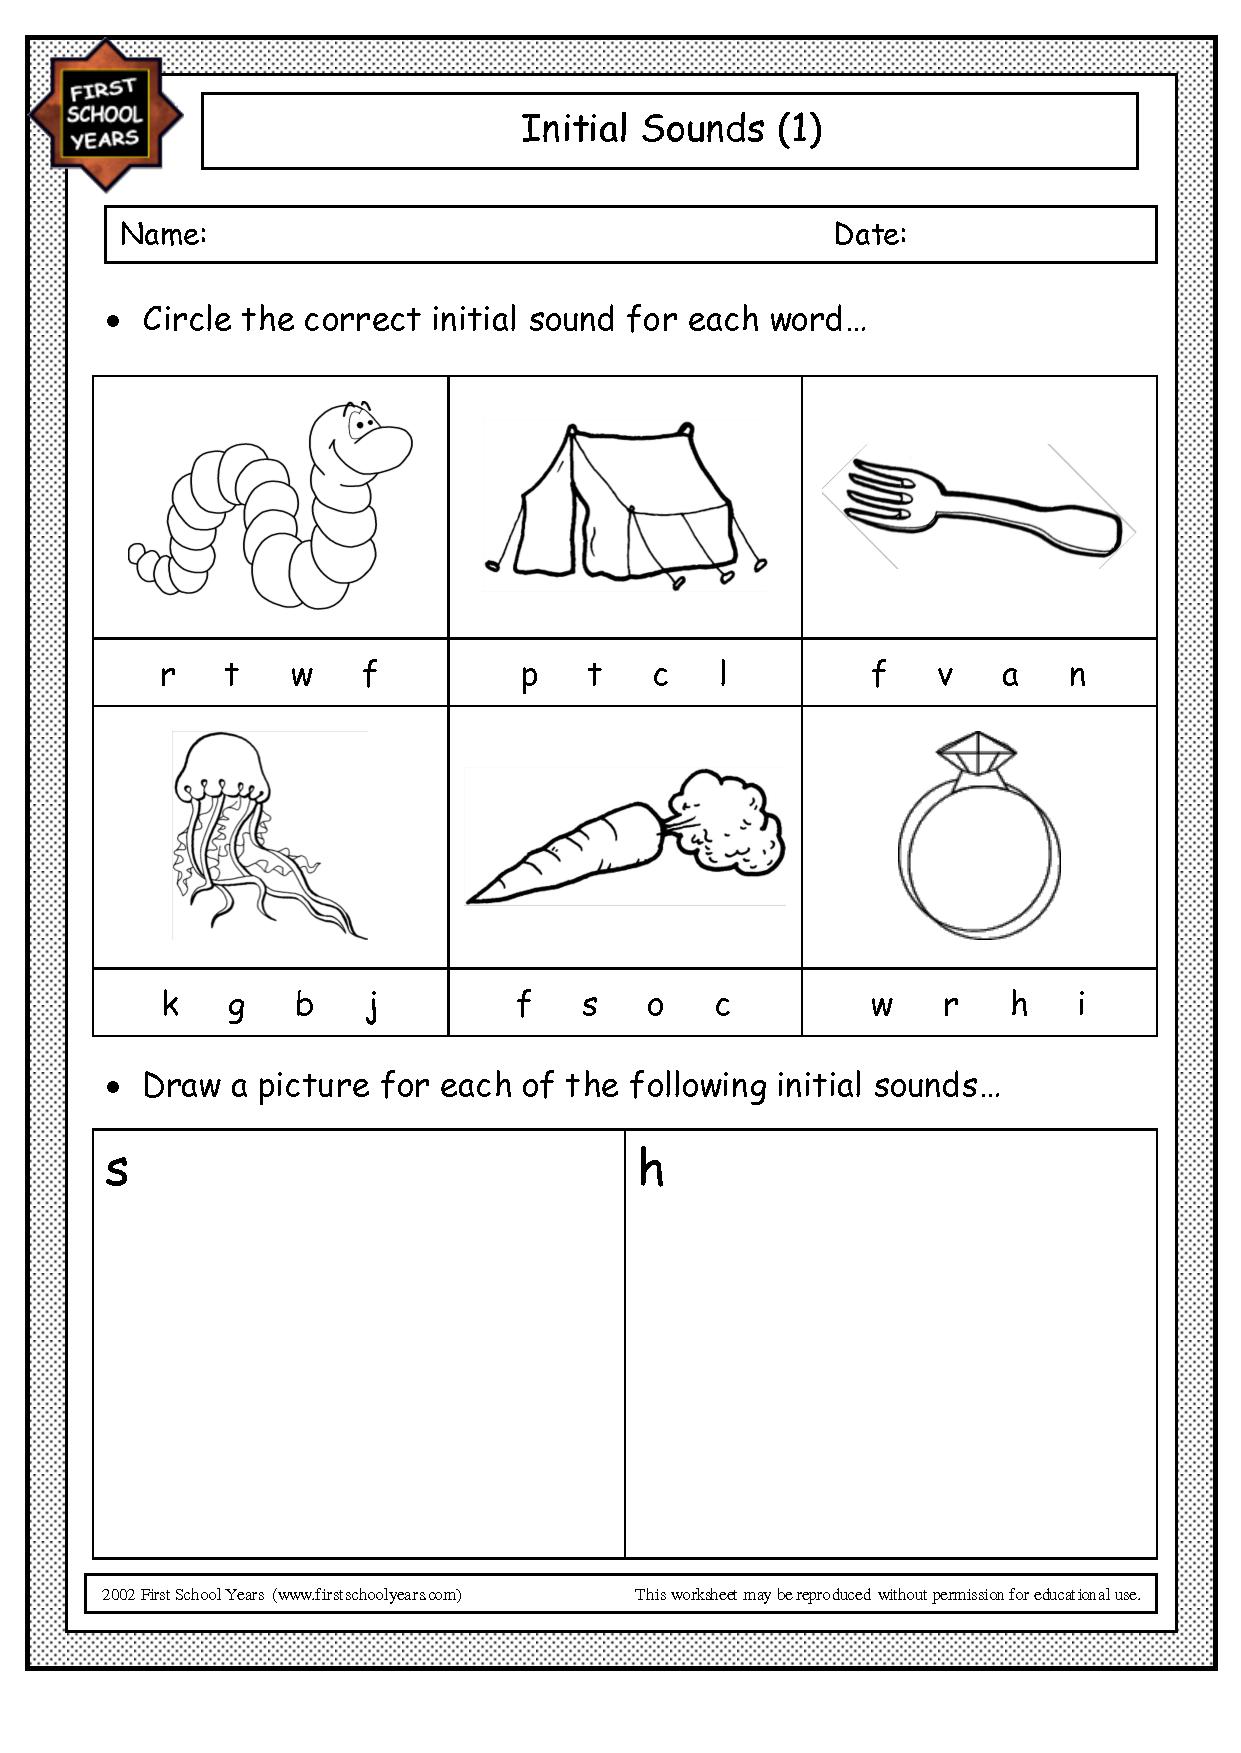 Jolly Phonics Worksheets Phonics Worksheets D | Jolly with regard to Letter D Worksheets For 1St Grade